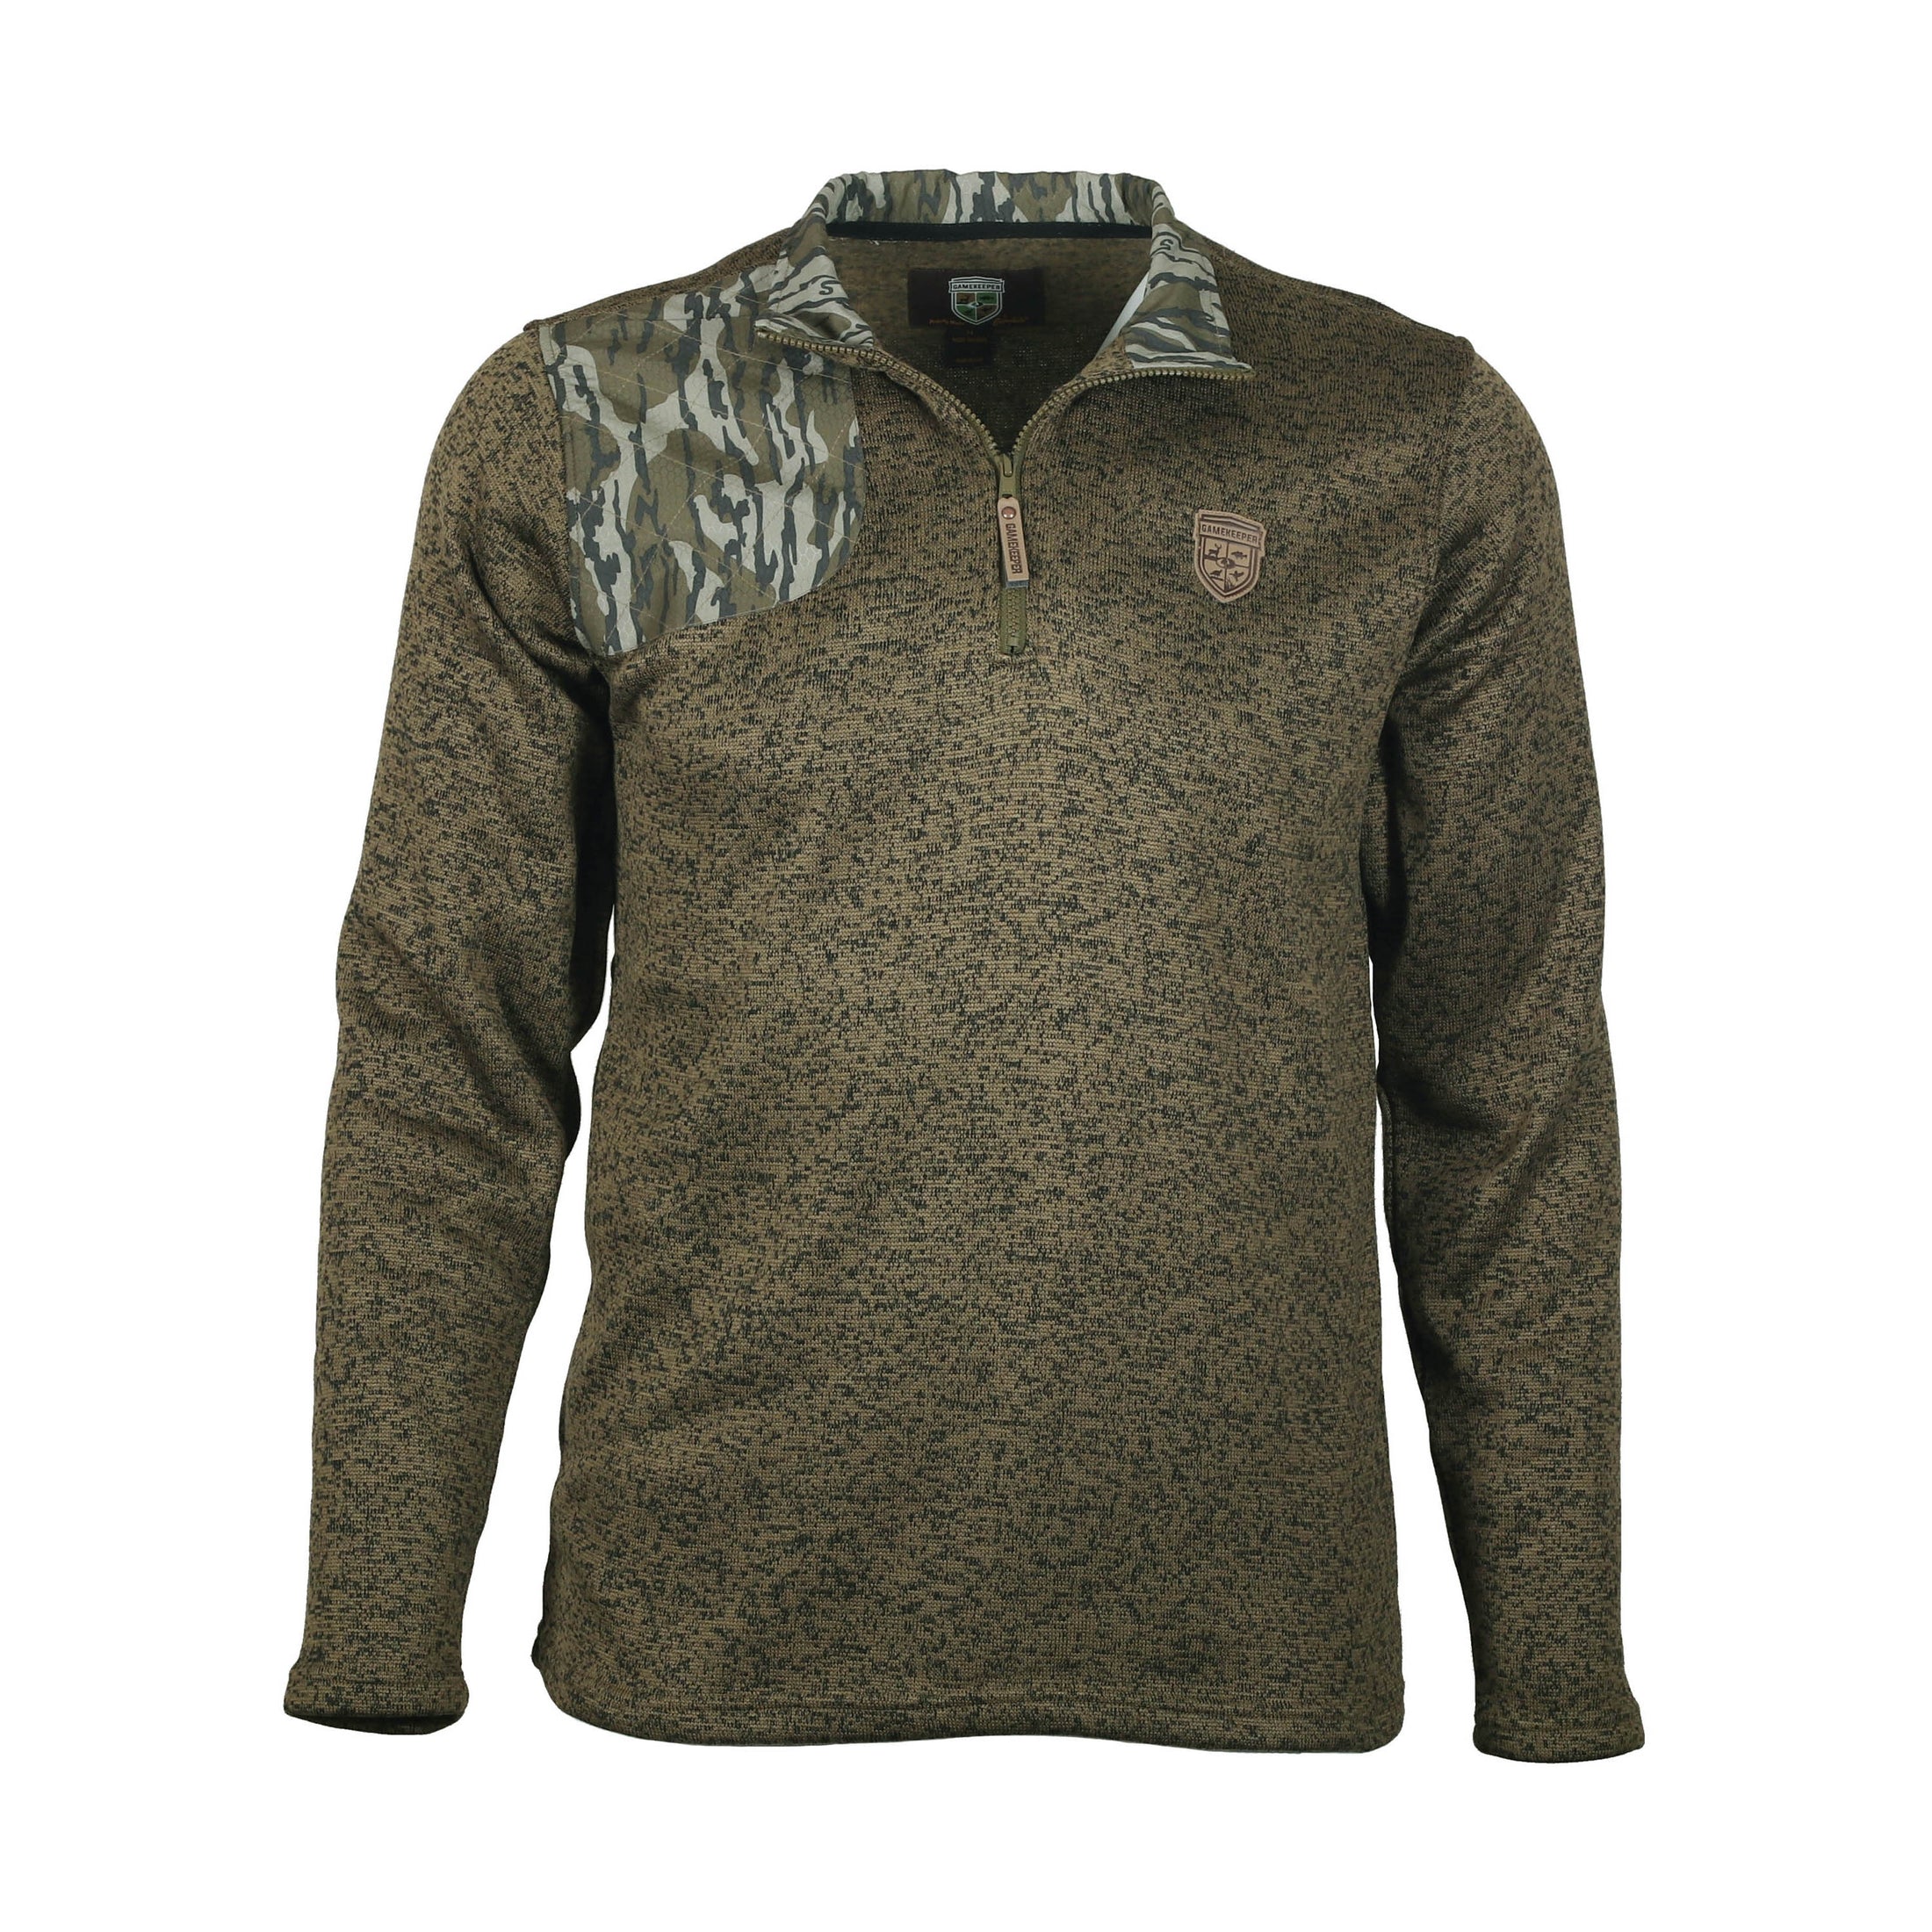 Gamekeeper wing shooter pullover front view (bark/bottomland)